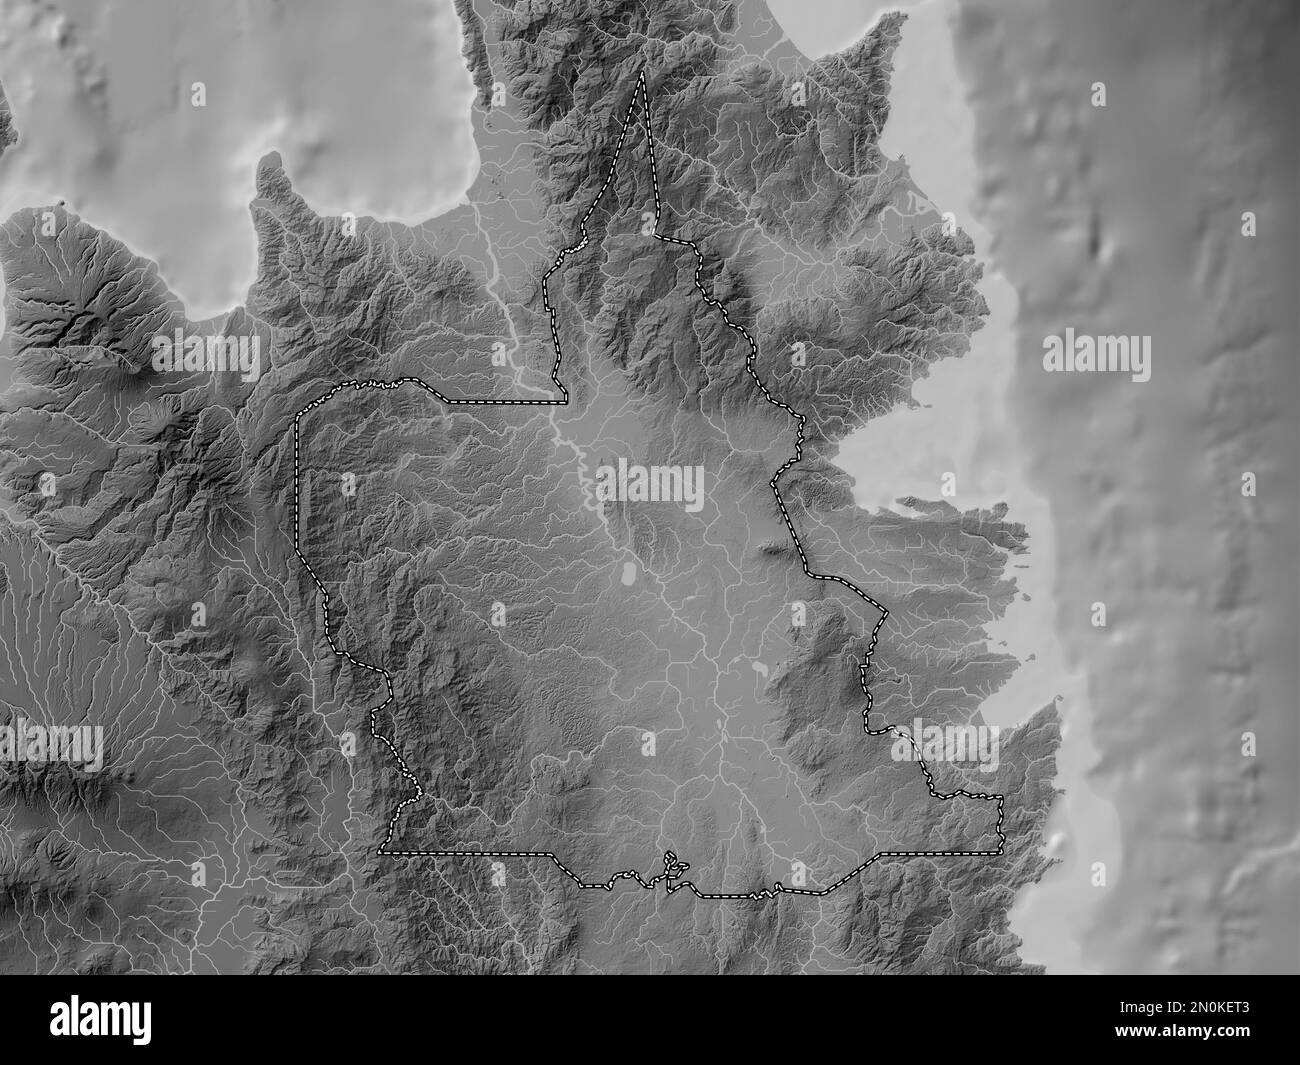 Agusan del Sur, province of Philippines. Grayscale elevation map with lakes and rivers Stock Photo